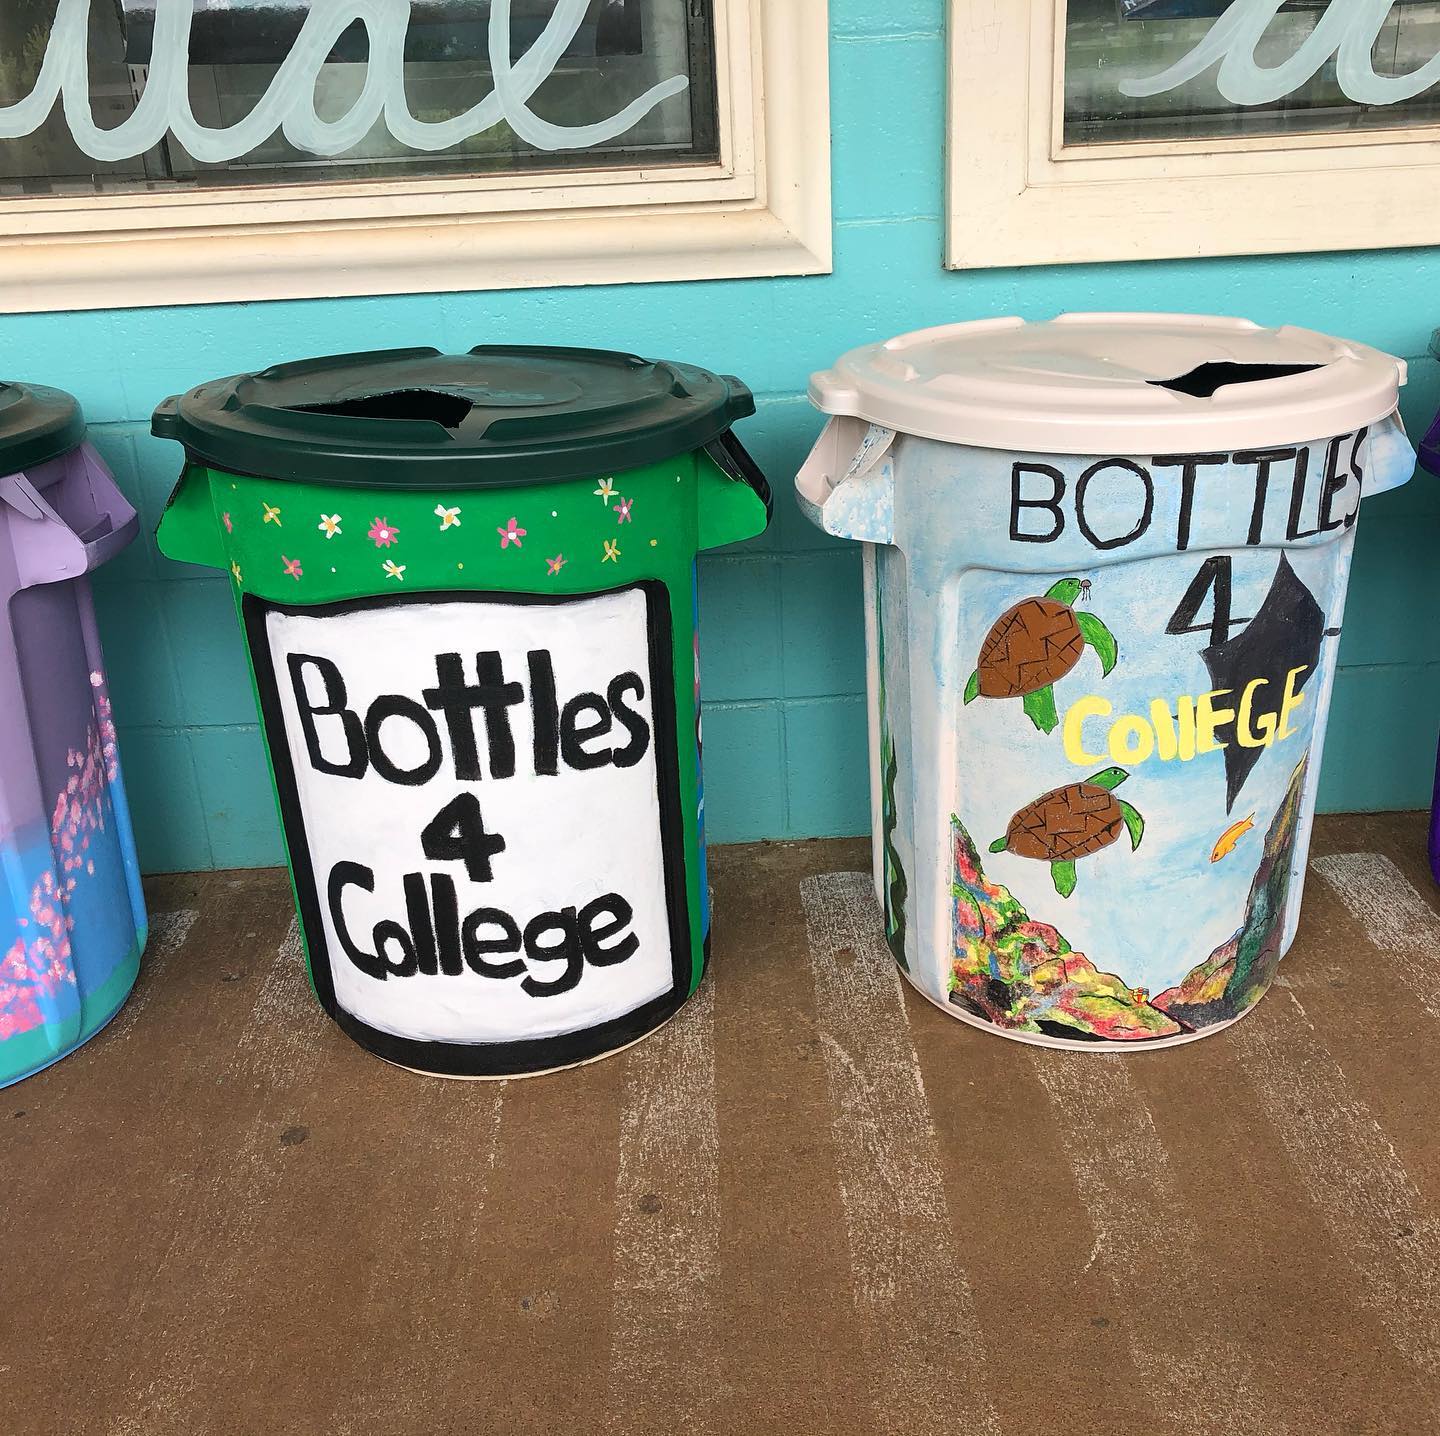 decorated and colorful recycling bins